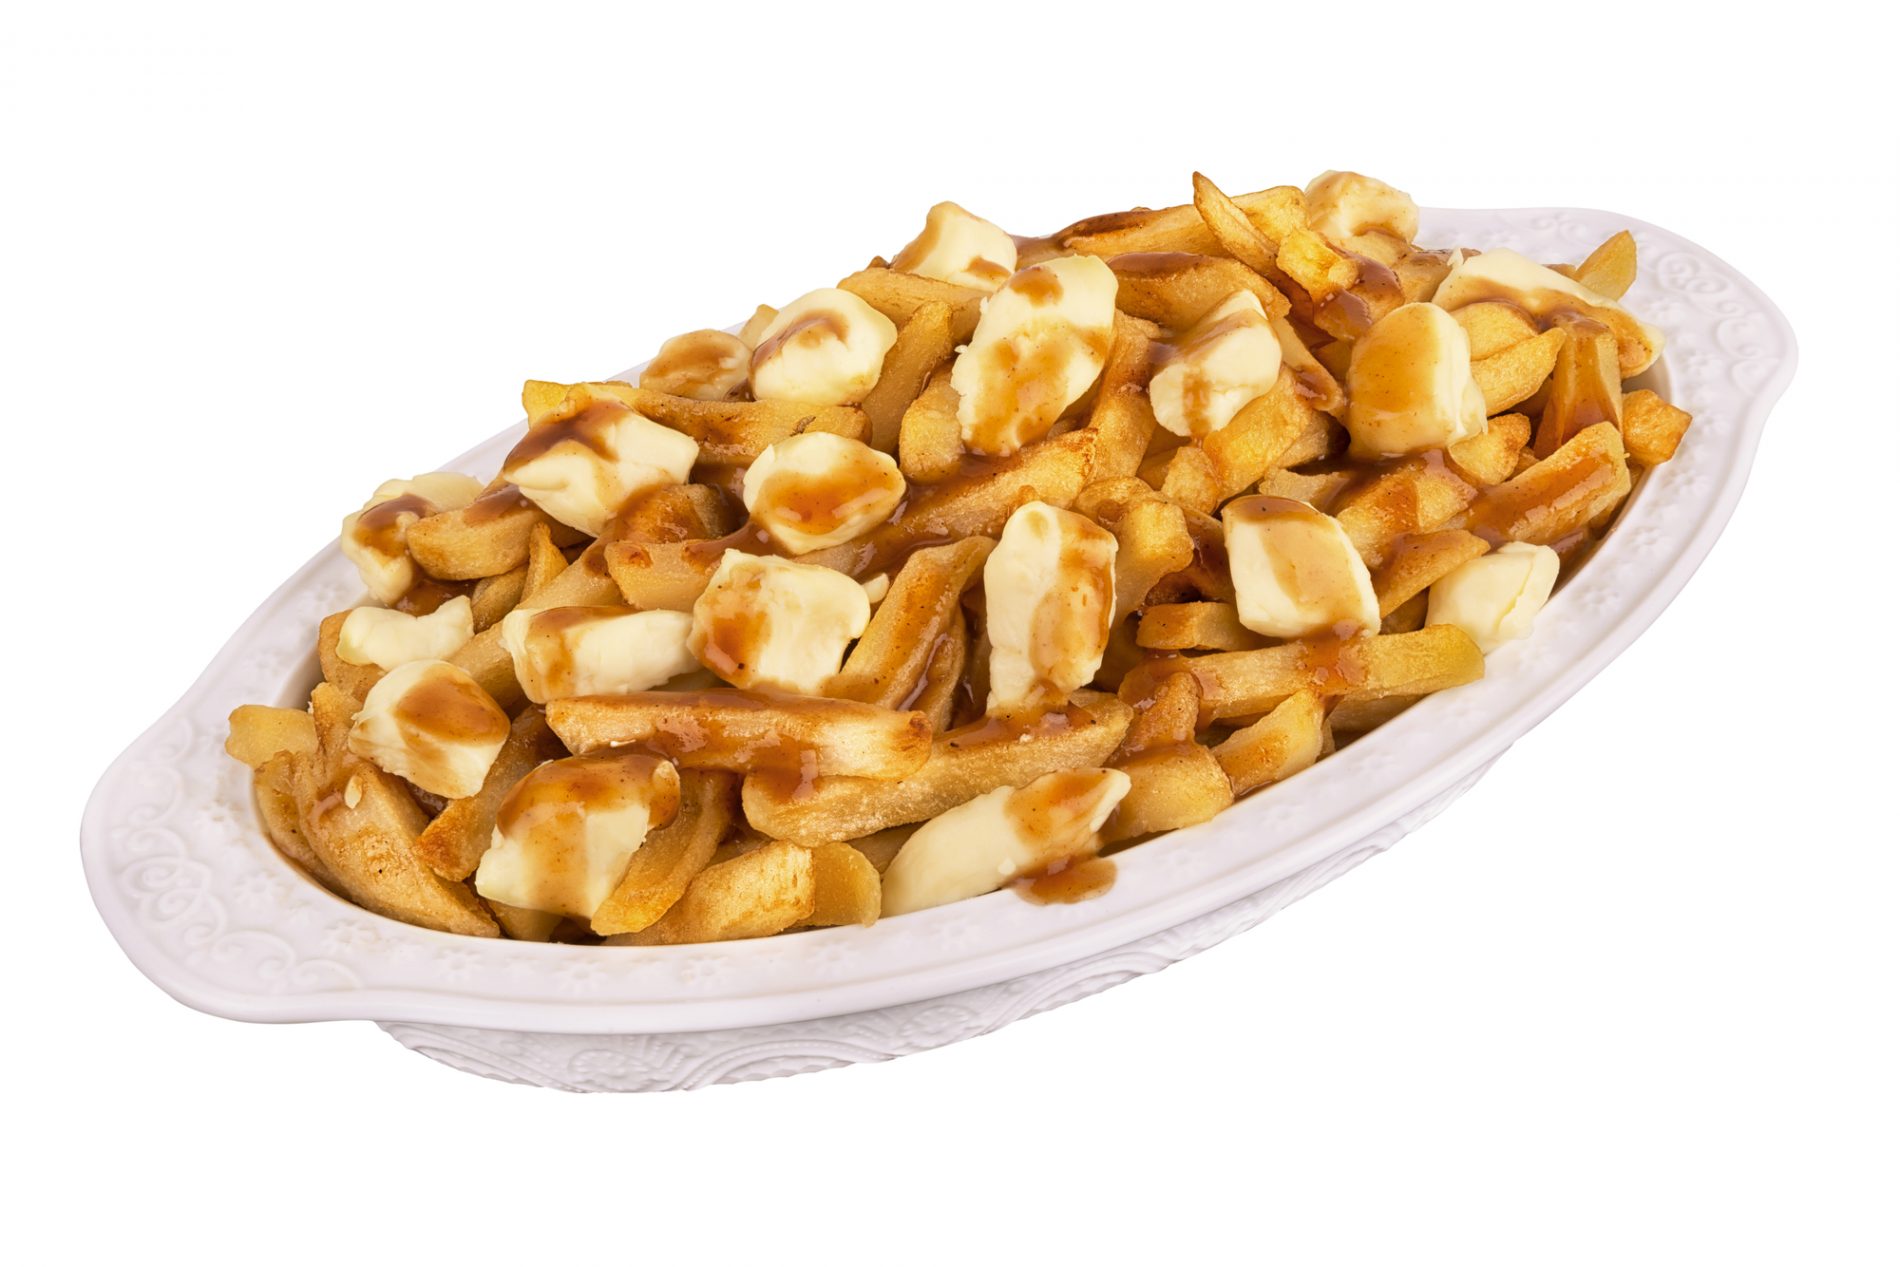 The Poutine and Where to Eat Them